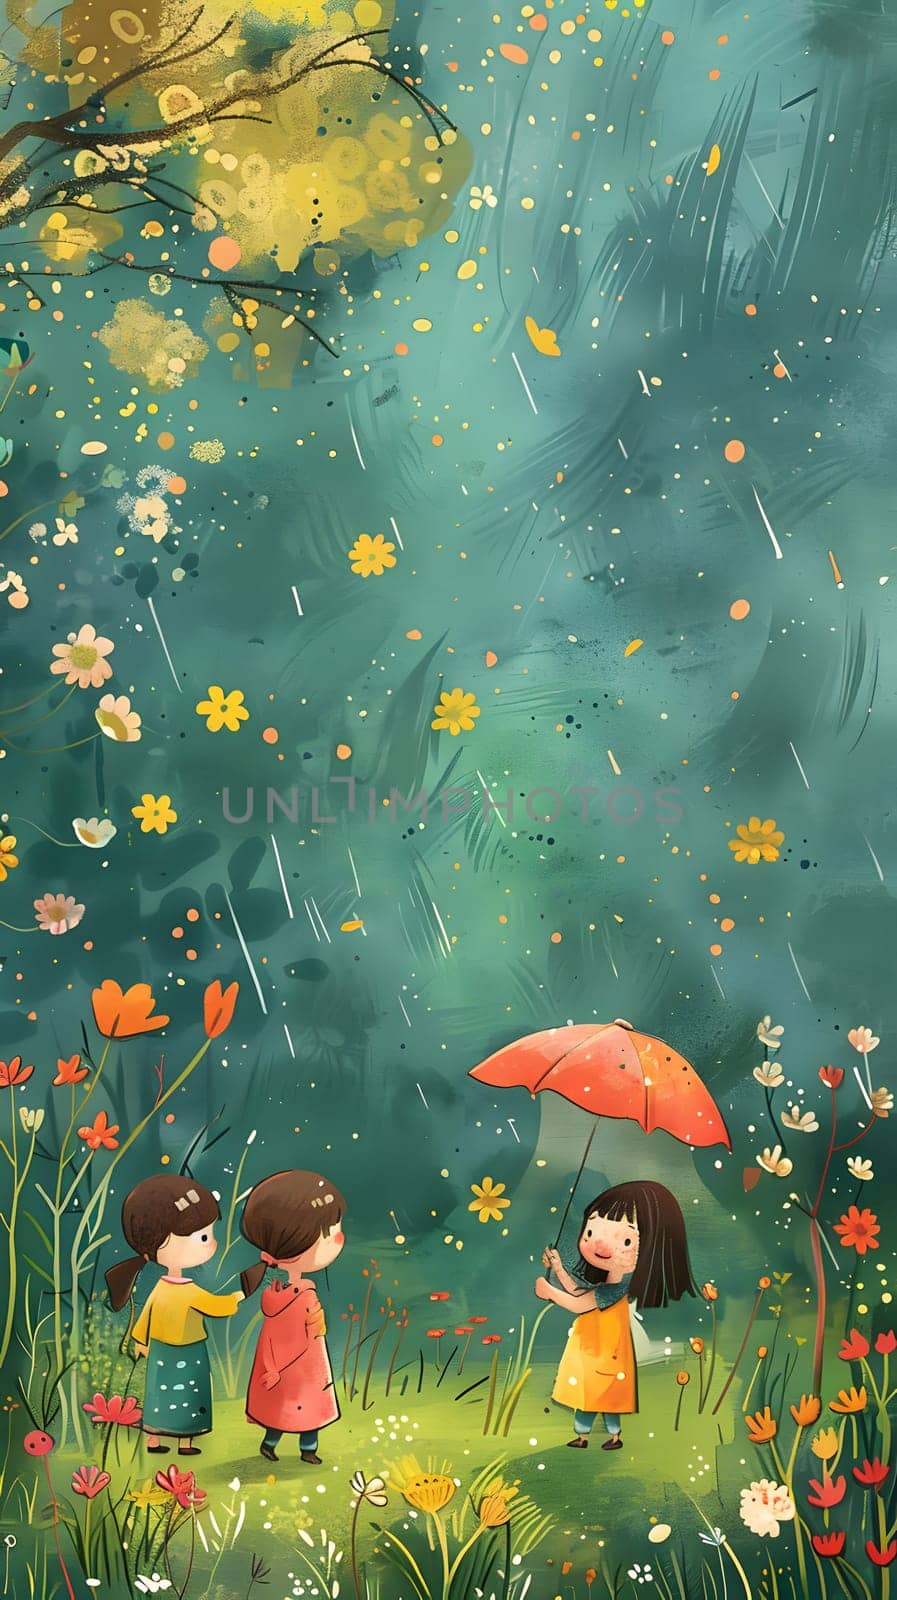 A beautiful painting depicting three girls standing in the rain, holding an umbrella, surrounded by lush green vegetation and natural environment